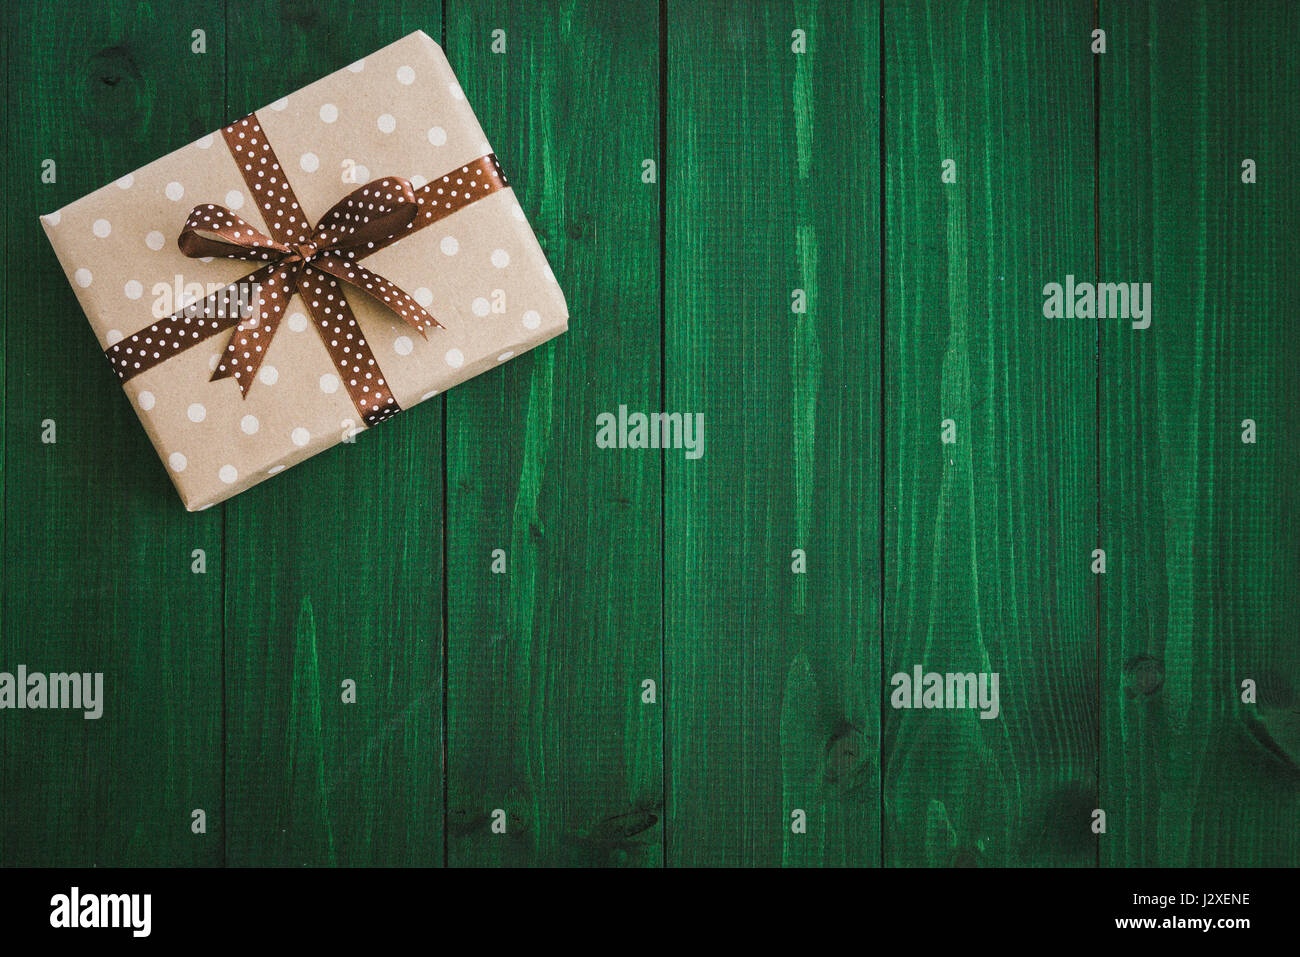 Gift box wrapped in craft paper with dried flowers Stock Photo - Alamy